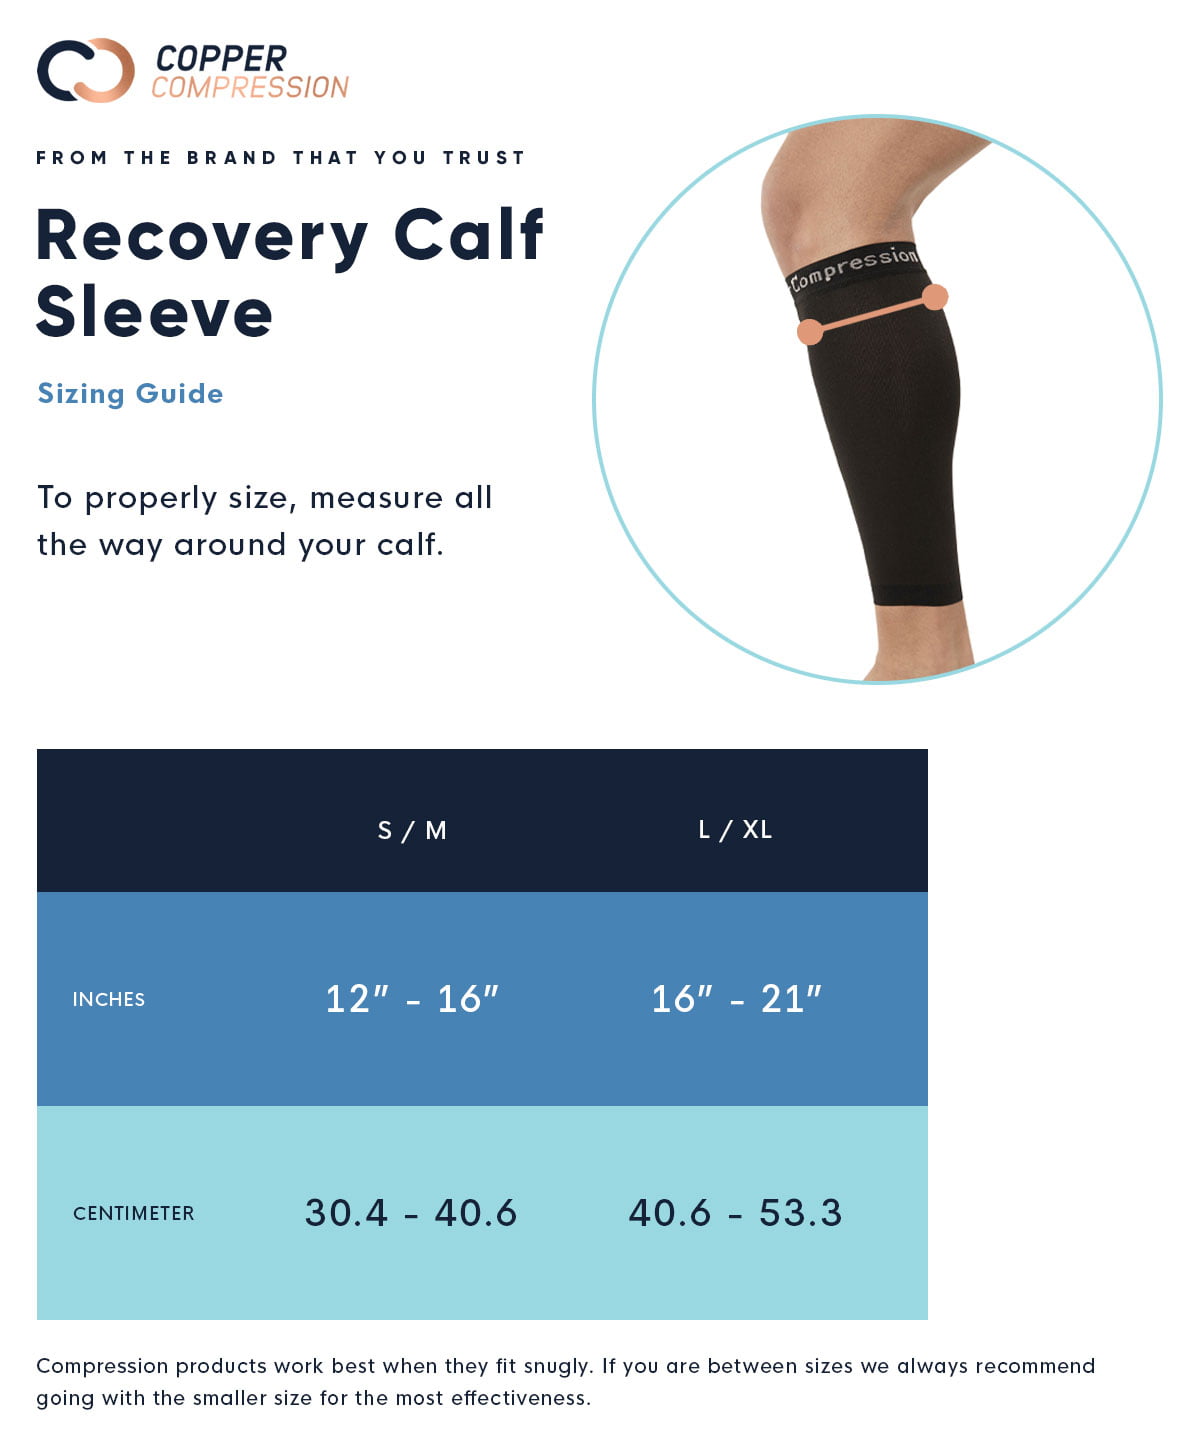 Calf Compression Sleeves for Men and Women - Copper Compression Calves  Support for Football, Running, Sports. Increase Blood Flow. Reduce Muscle